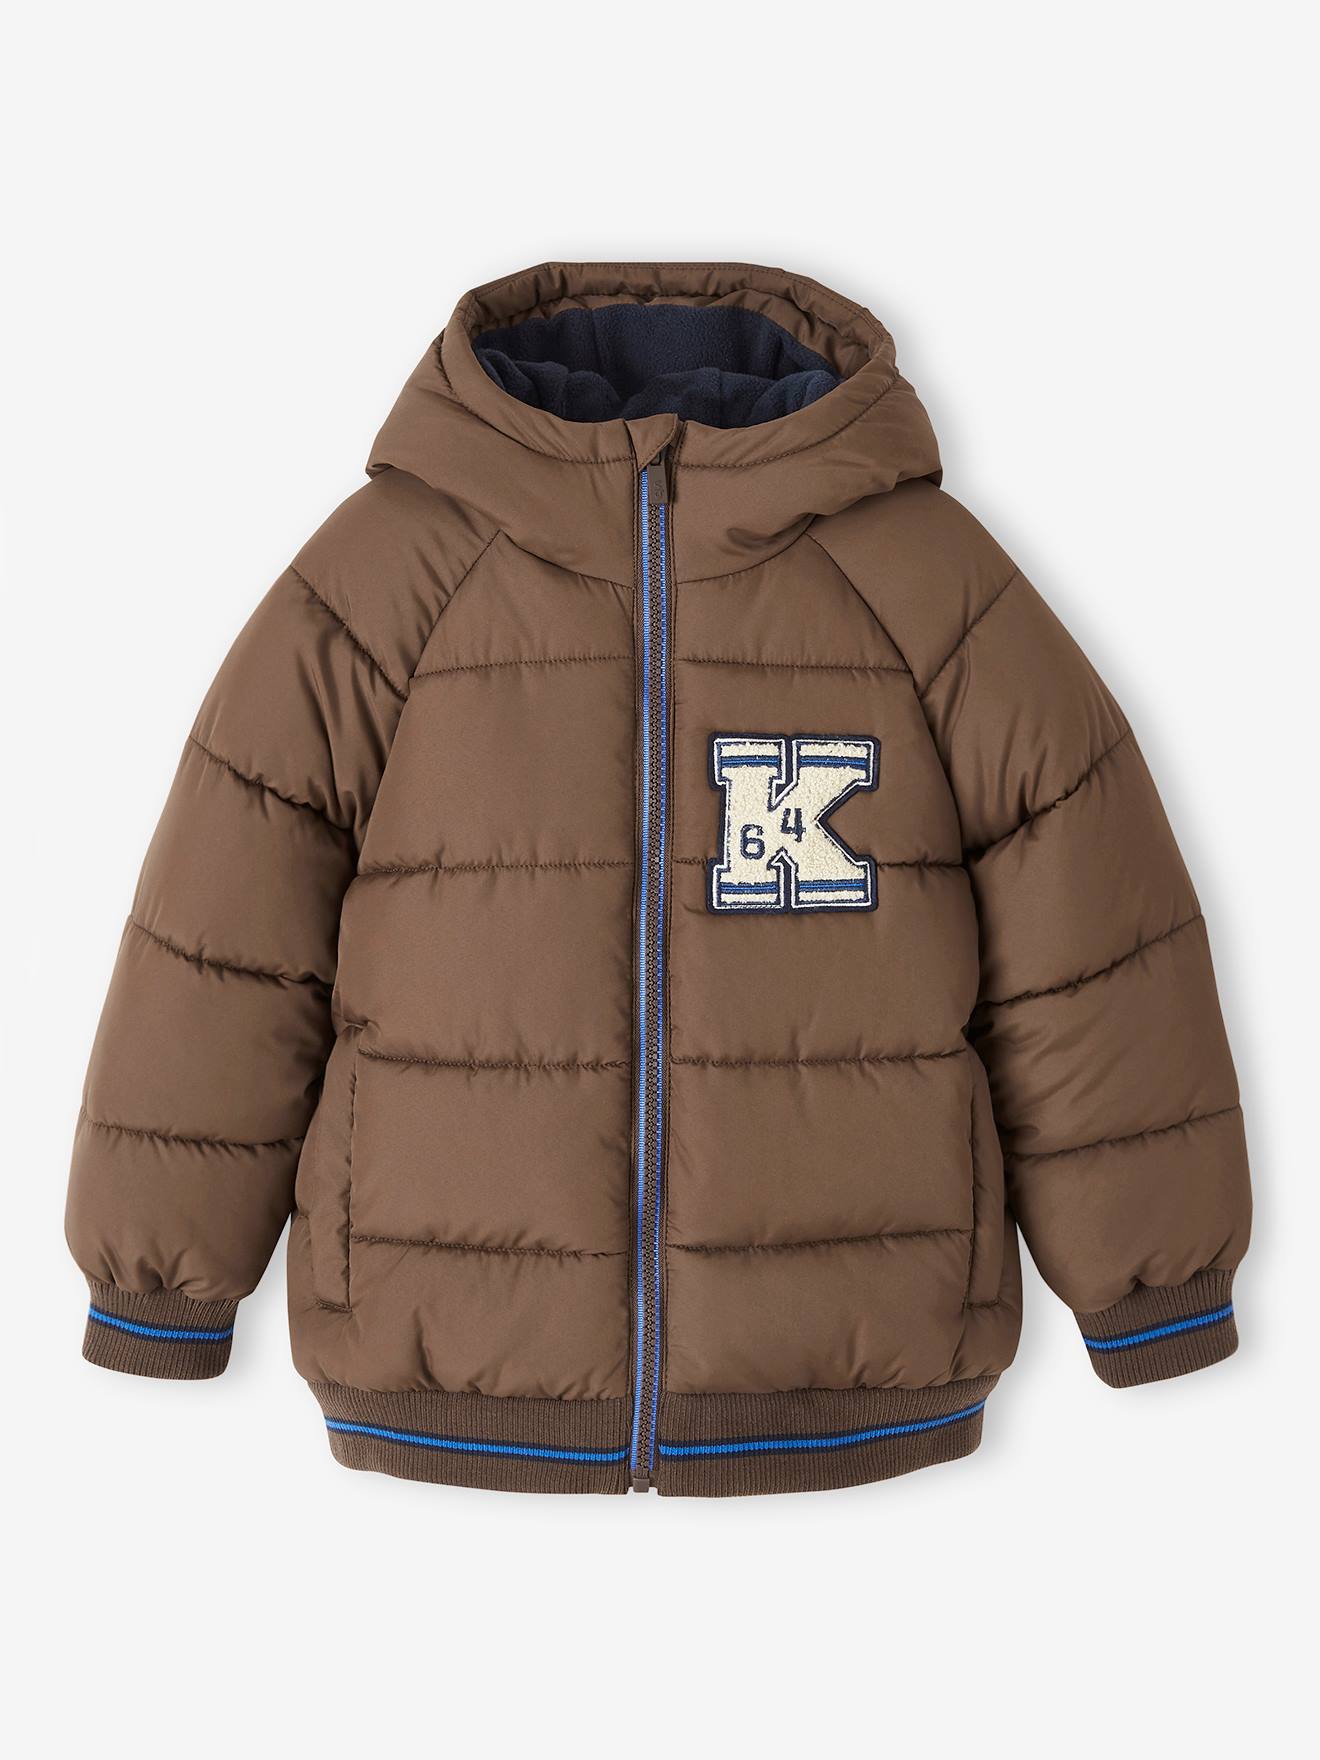 College-Style Padded Jacket with Polar Fleece Lining for Boys chocolate